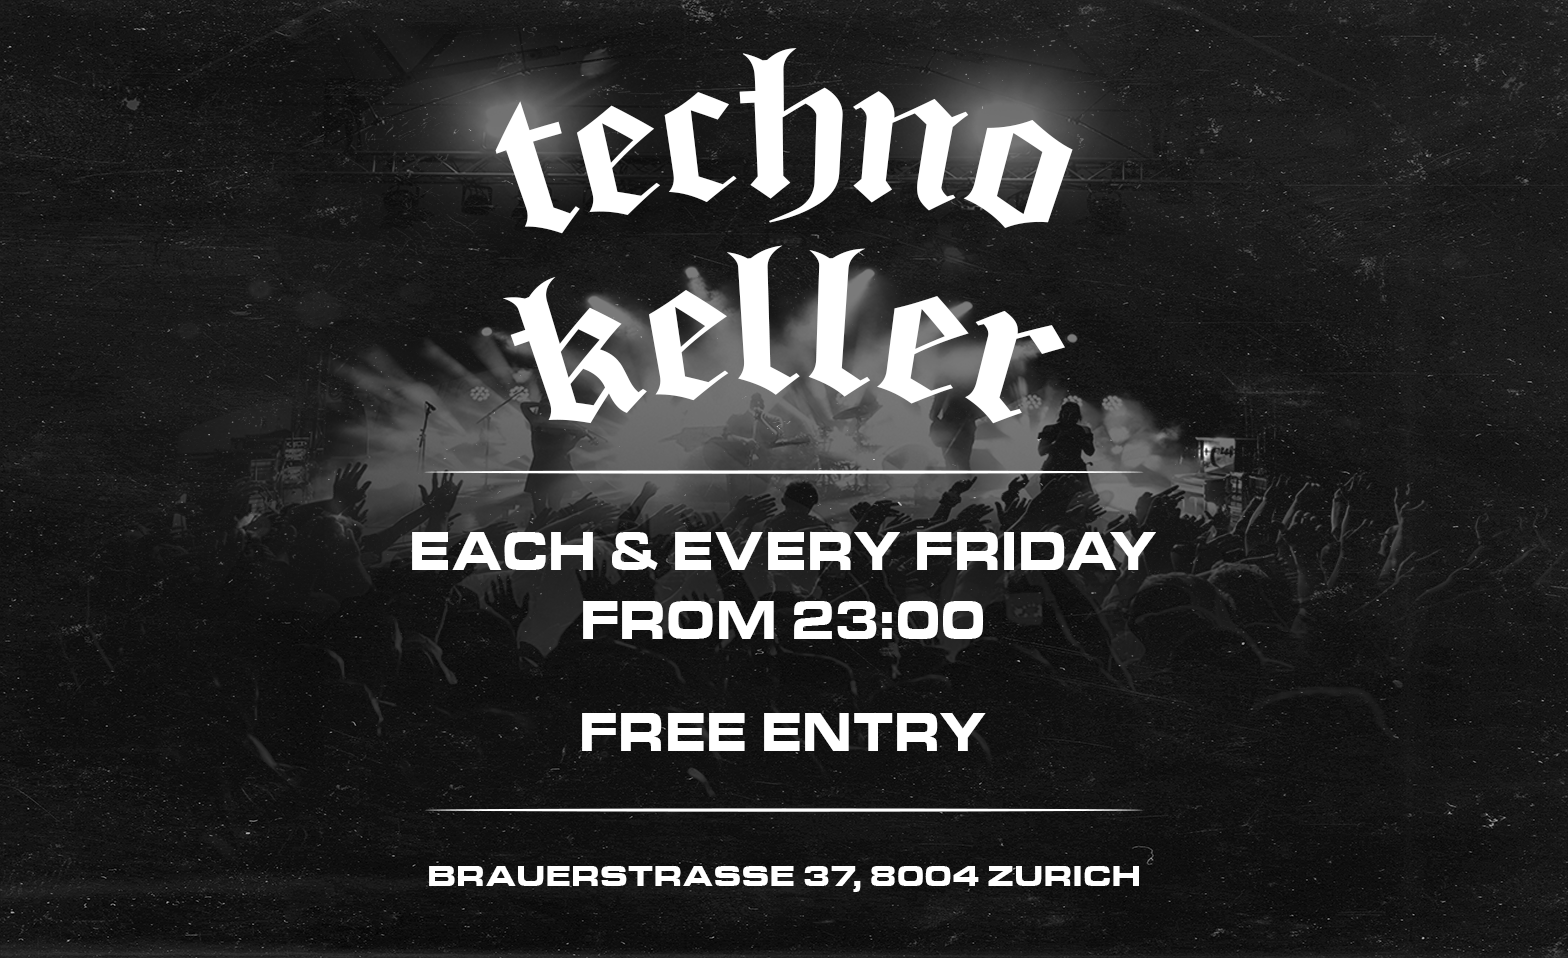 TECHNOKELLER - FREE ENTRY EACH AND EVERY FRIDAY ${singleEventLocation} Tickets